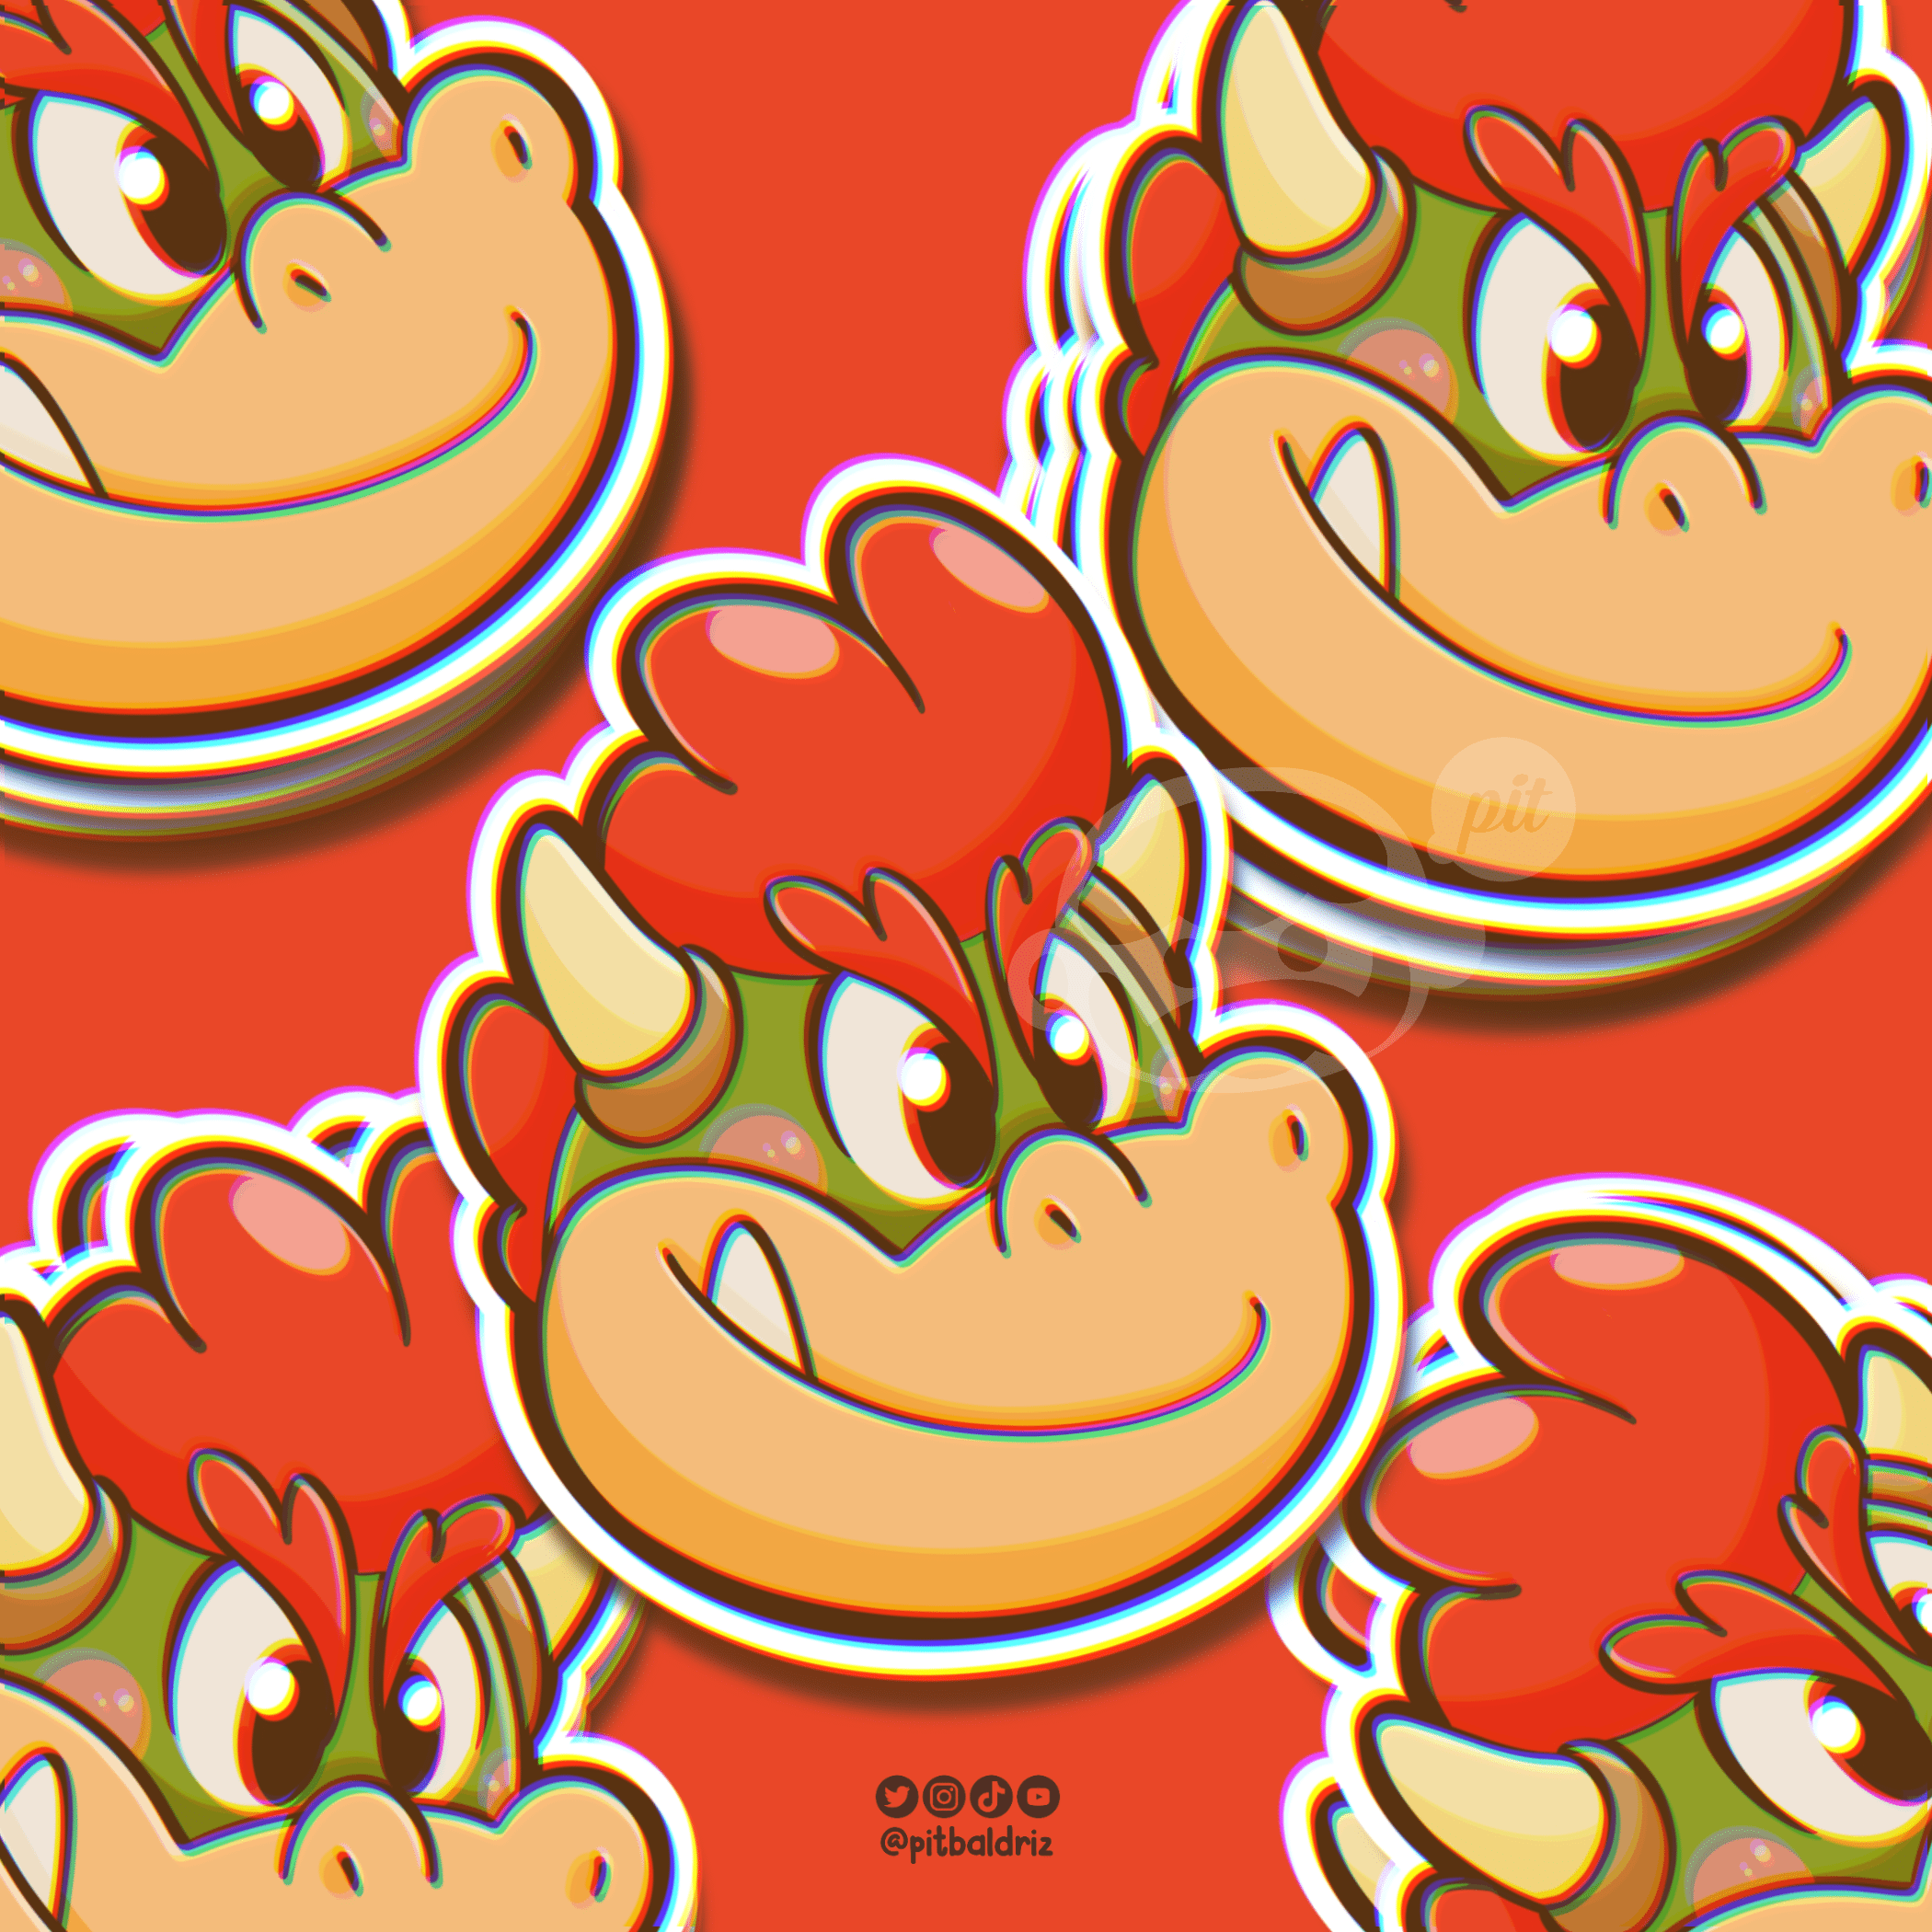 Bowser Stickers